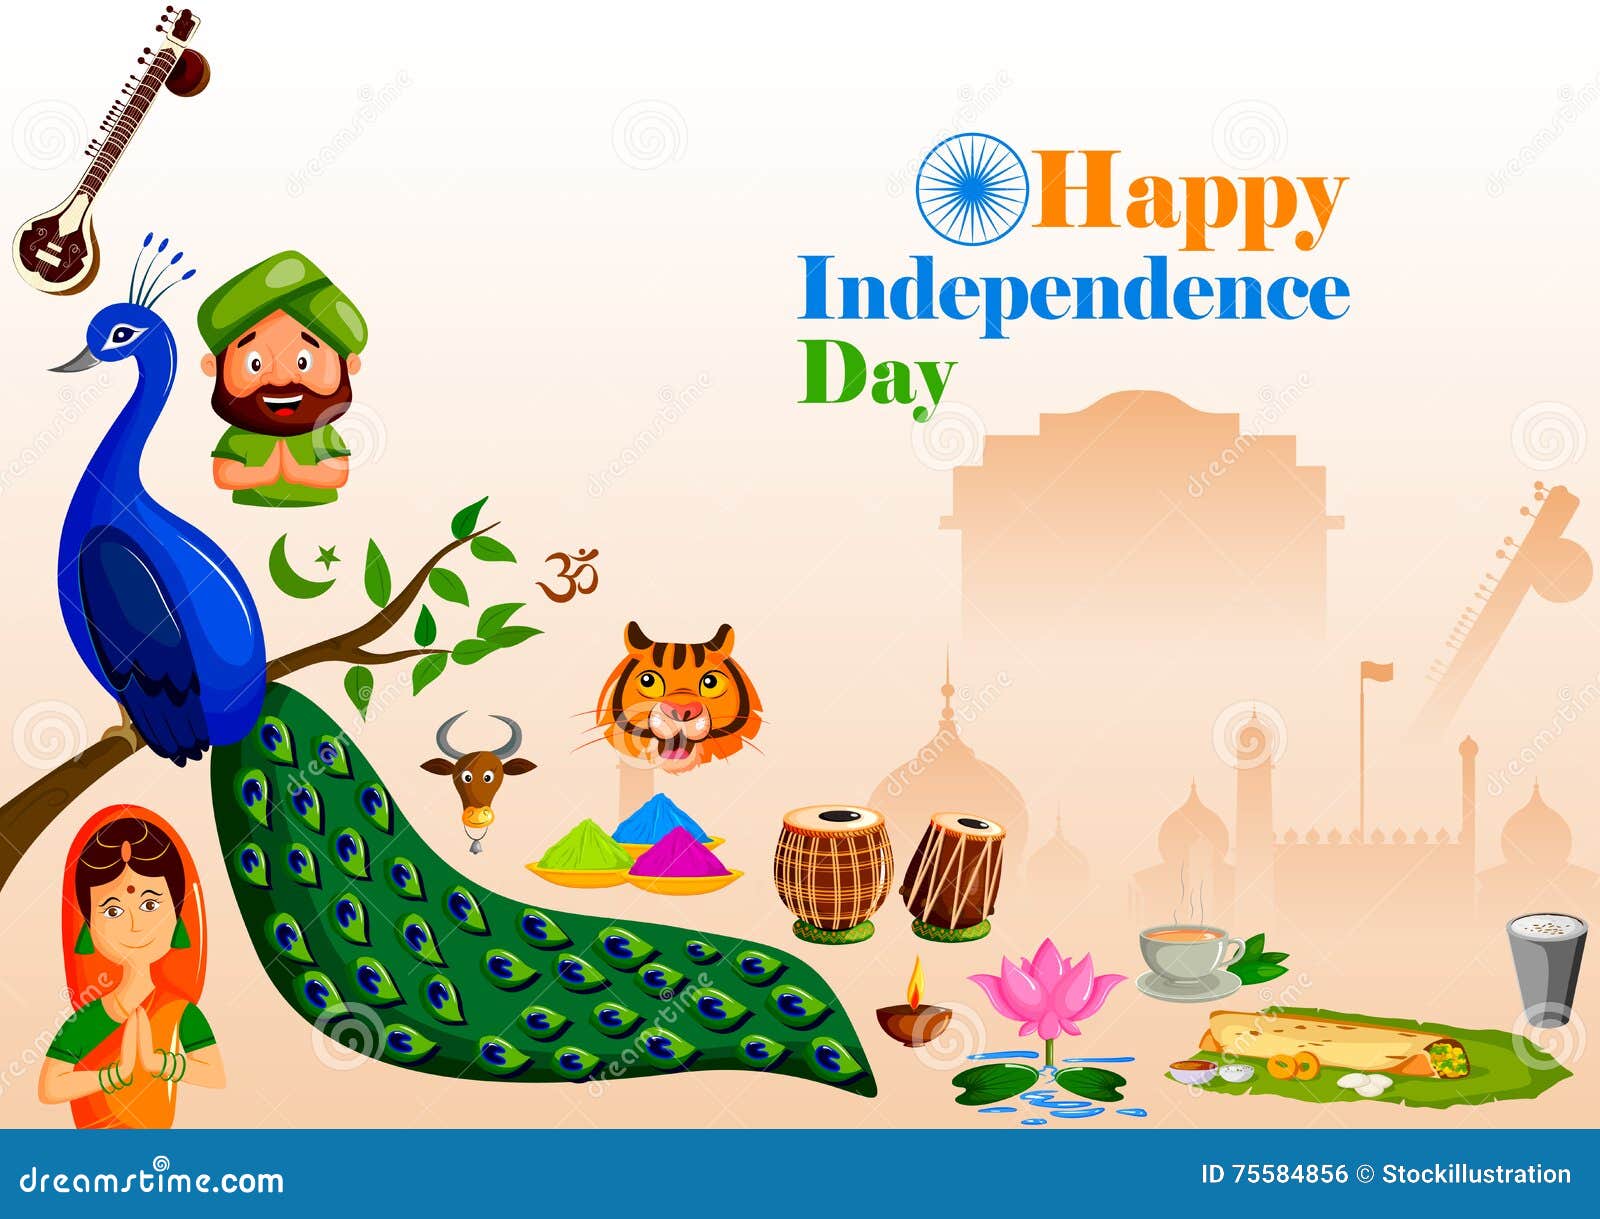 Happy Independence Day Of India Stock Vector - Illustration of hinduism ...